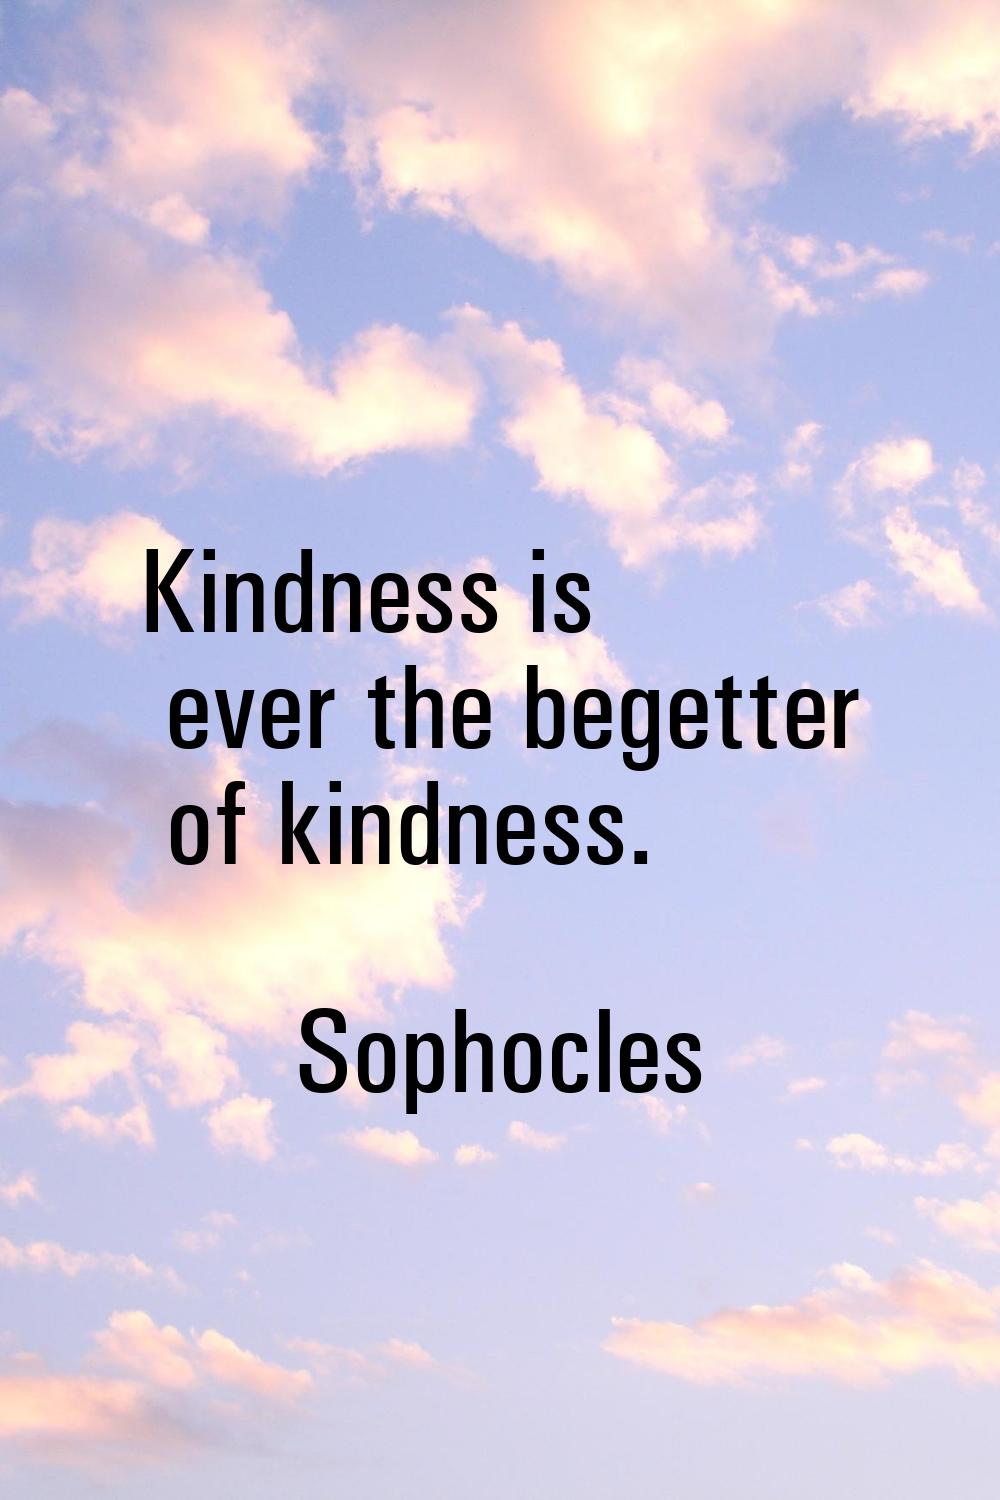 Kindness is ever the begetter of kindness.